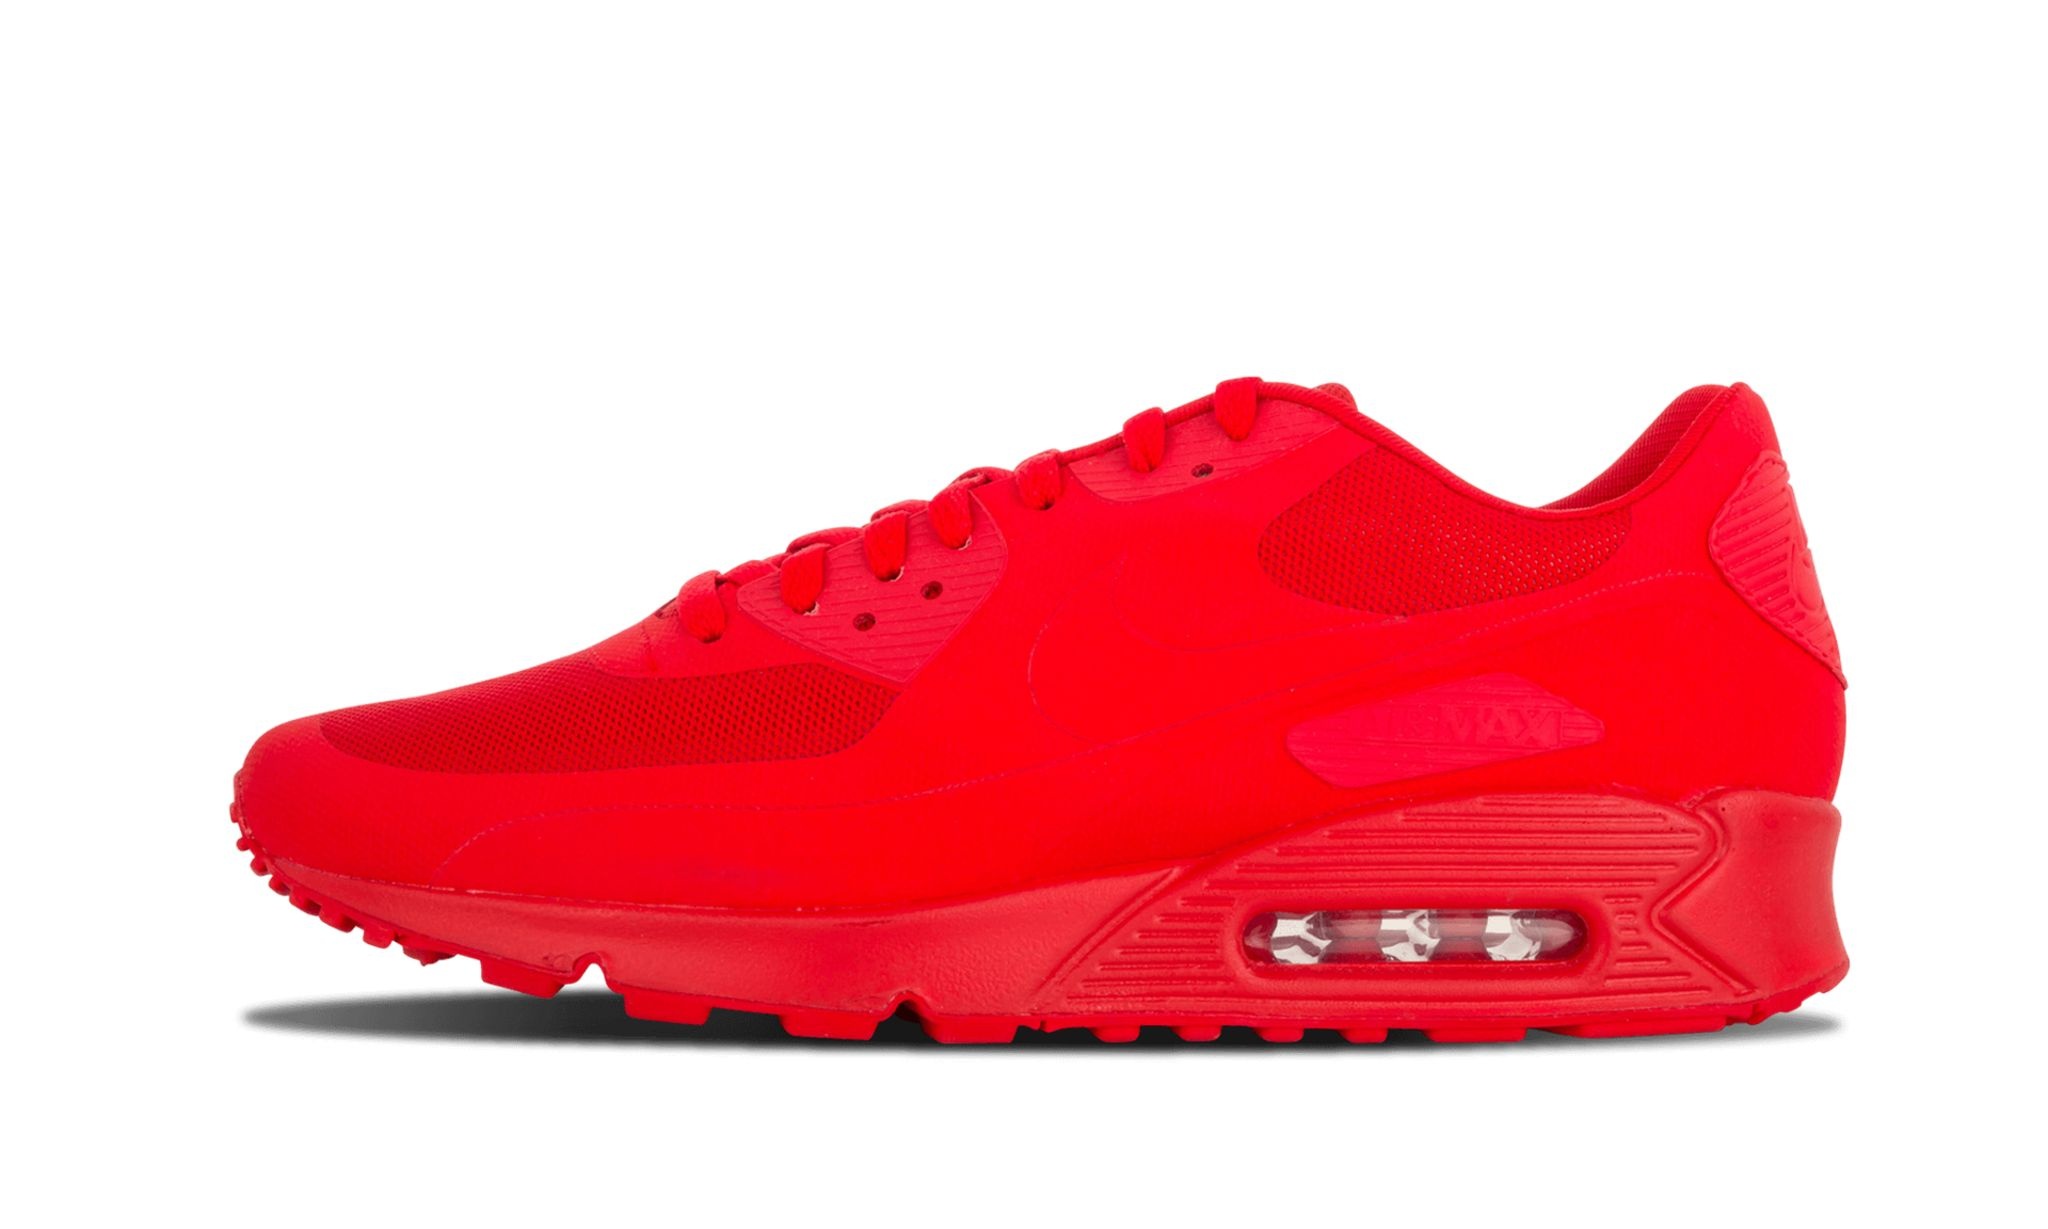 Air Max 90 HYP QS "Independence Day" - 1